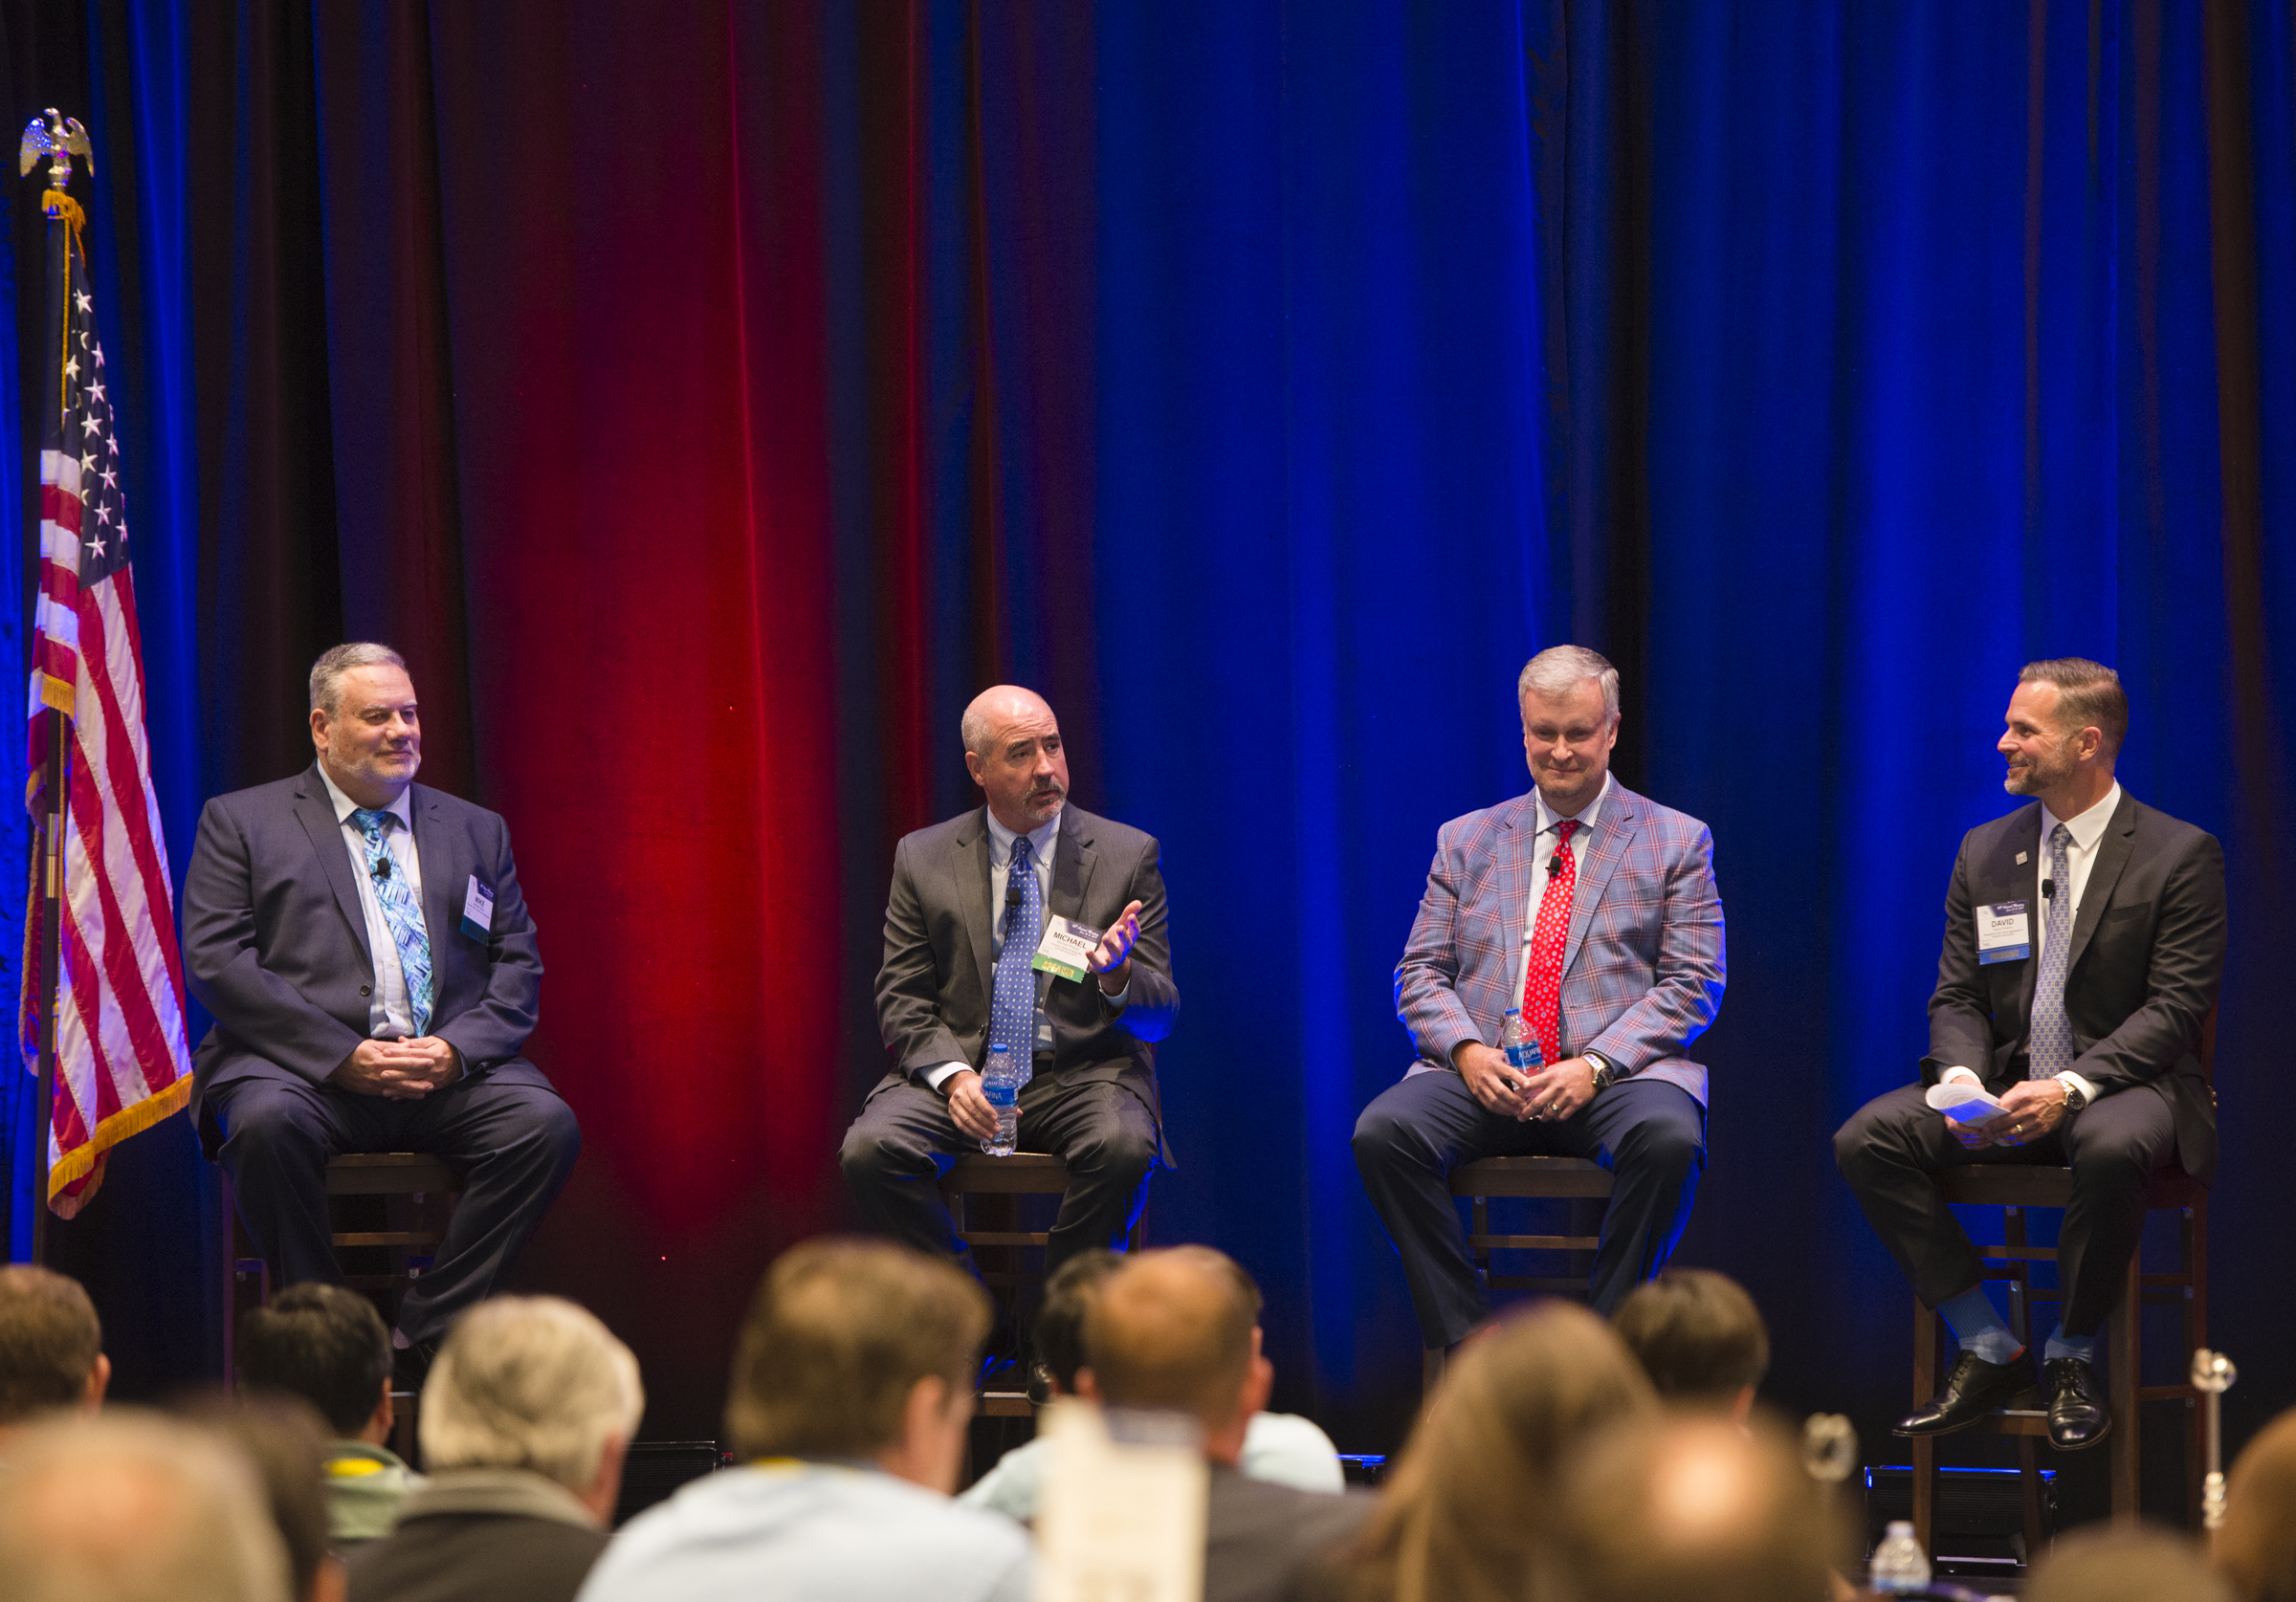 Left to right:  Michael Ireland, president and CEO, Portland Cement Association (PCA); Michael Philipps, president, National Ready Mixed Concrete Association (NRMCA); and Michael Johnson, president and CEO, National Stone, Sand & Gravel Association (NSSGA). TACA President David Perkins moderated the panel.